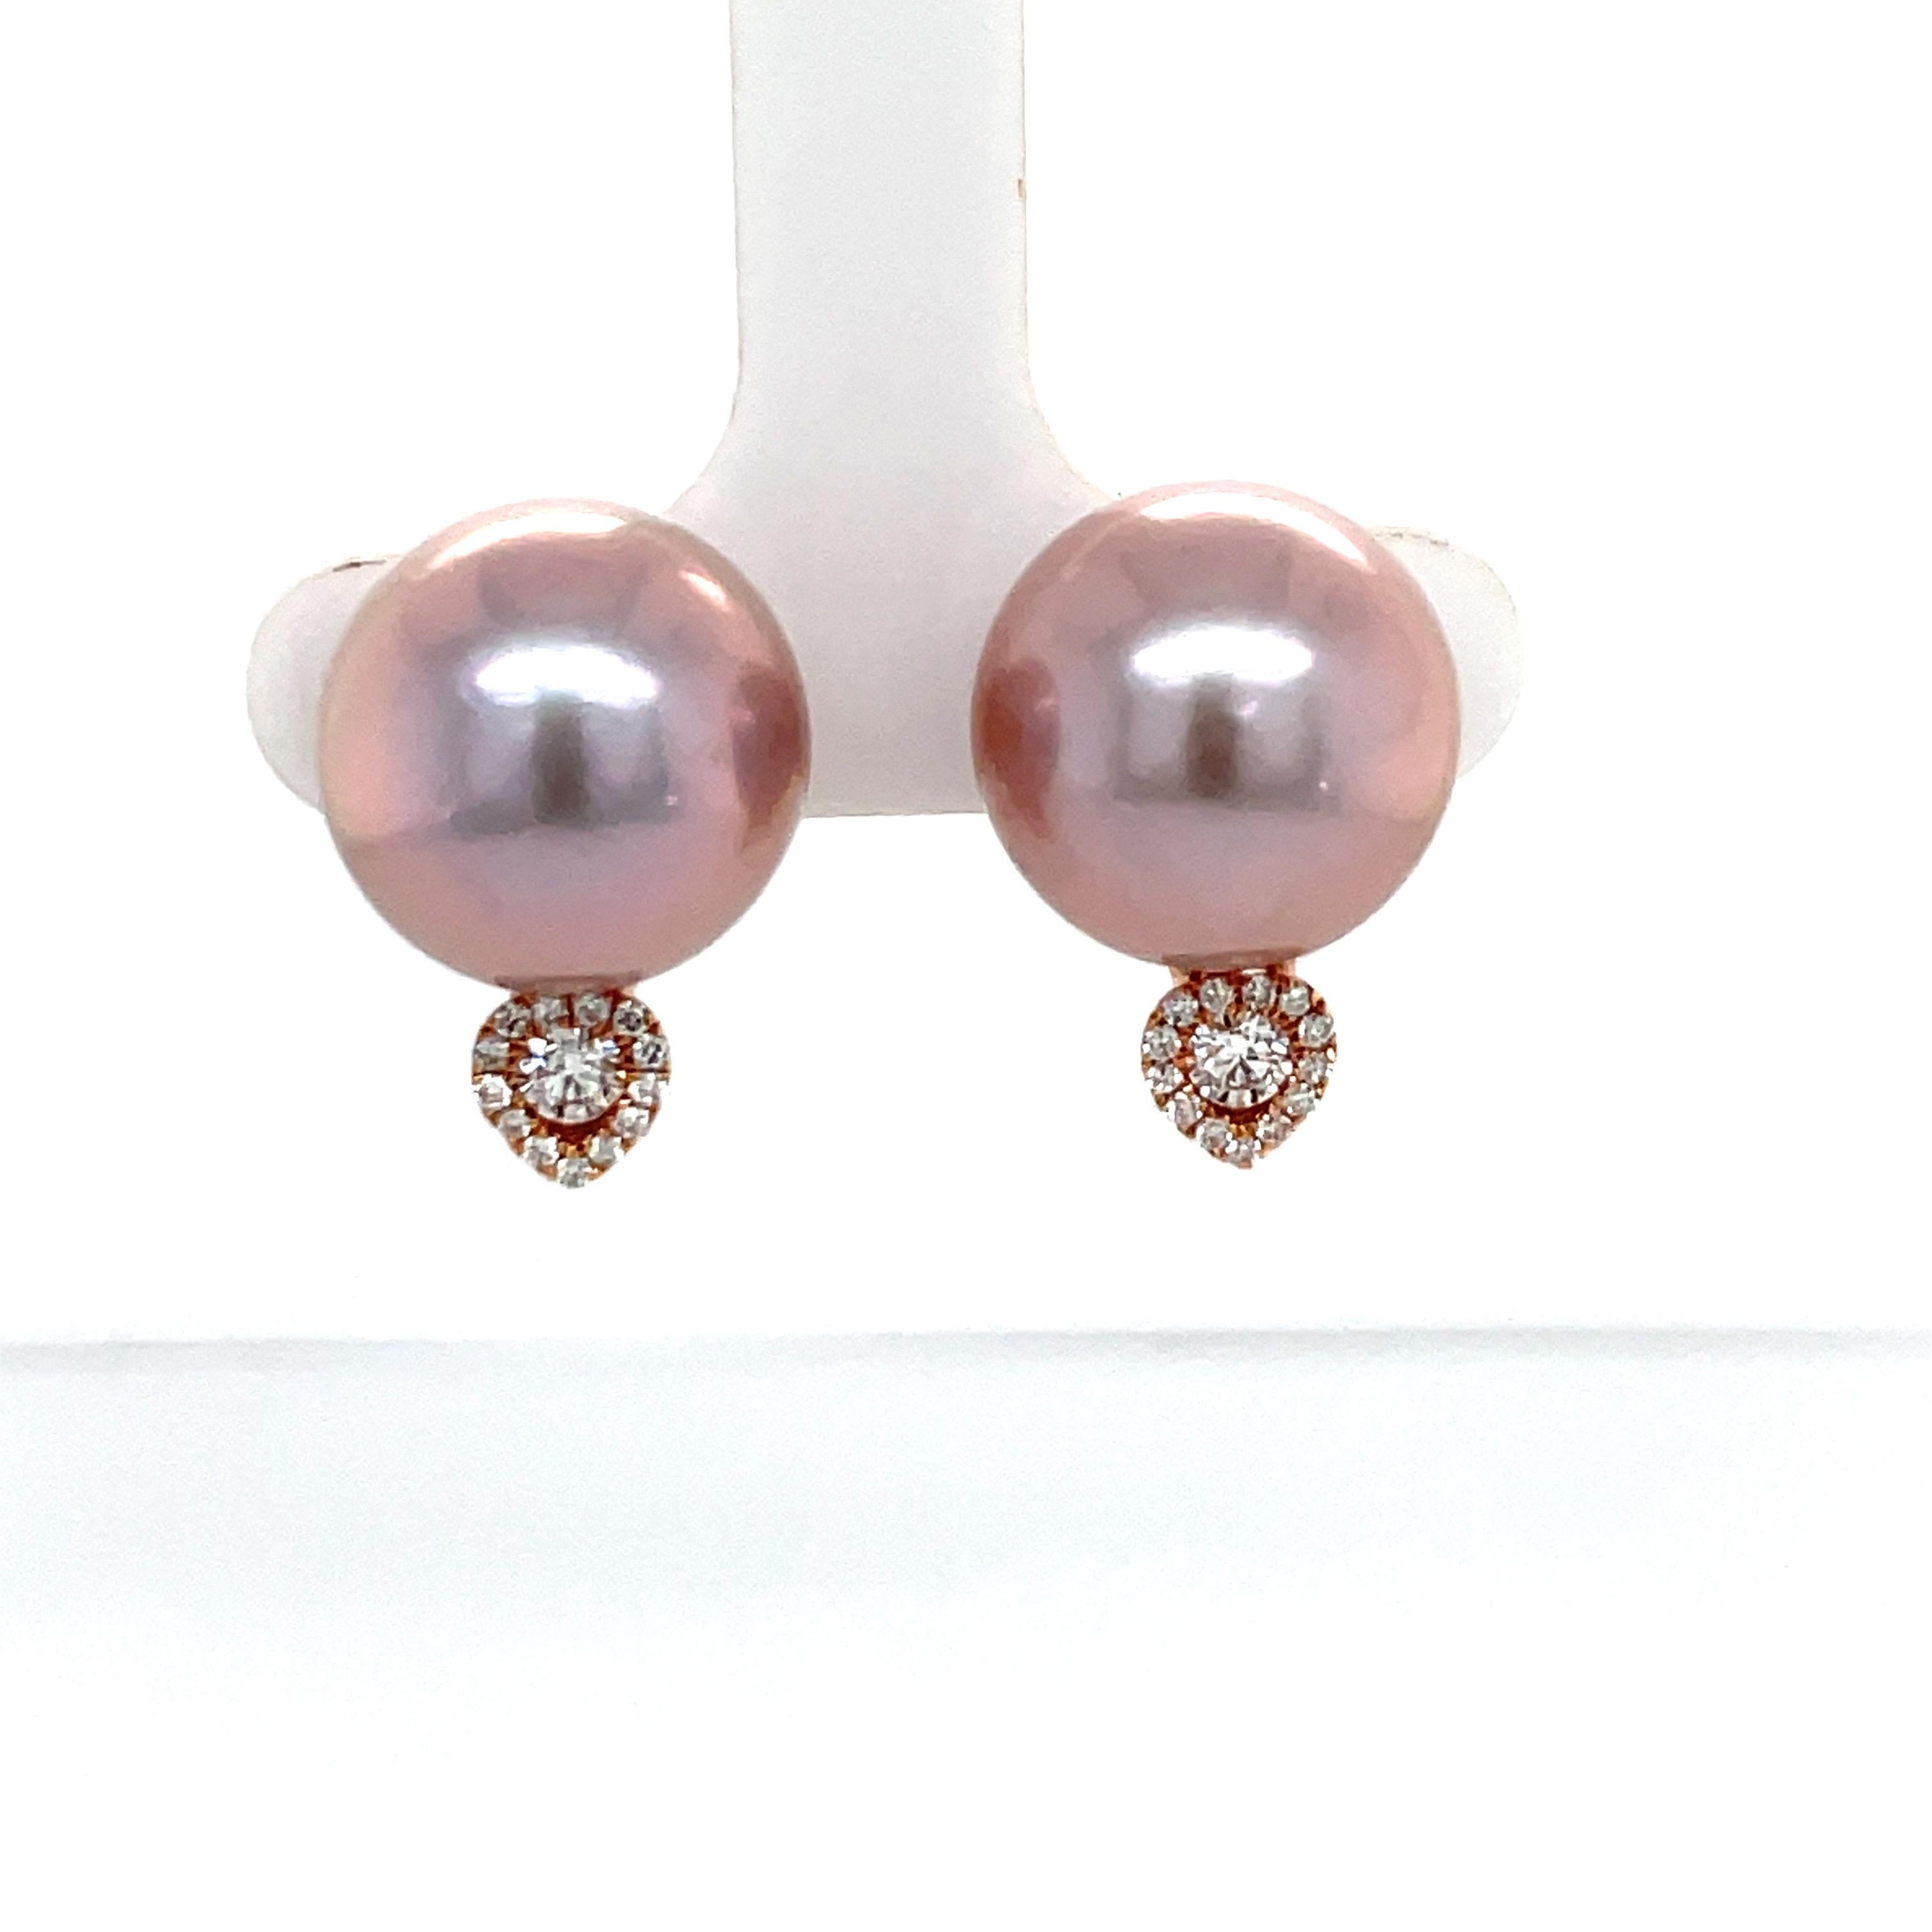 18 Karat Rose Gold stud earring featuring one Pink Freshwater Pearl measuring 12-13 MM with 2 round brilliants weighing 0.17 carats with a diamond halo weighing 0.10 carats. 
Color G-H
Clarity SI